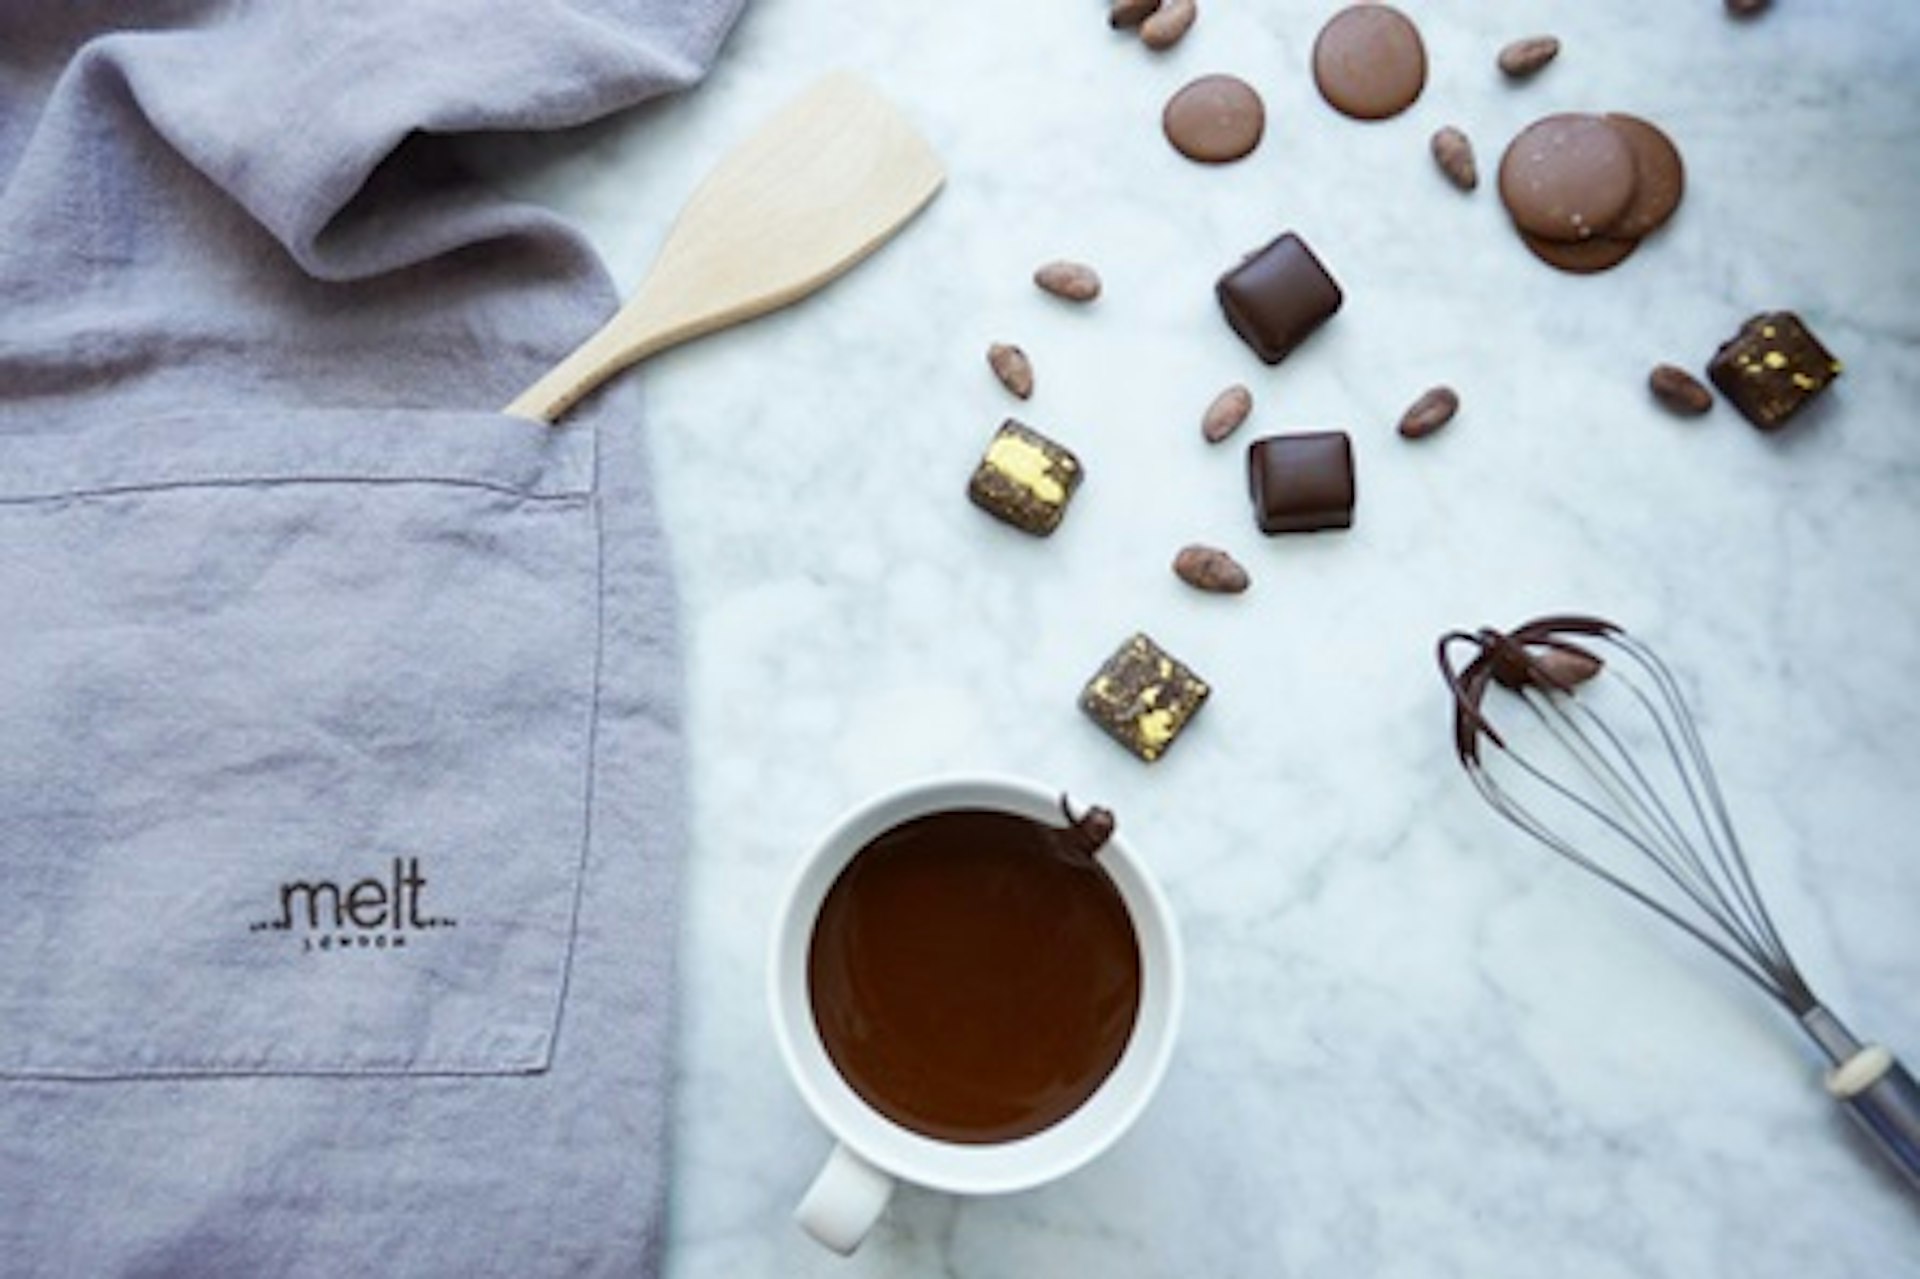 Sea Salt Chocolate Praline Making Class for Two with Melt Notting Hill, London 2